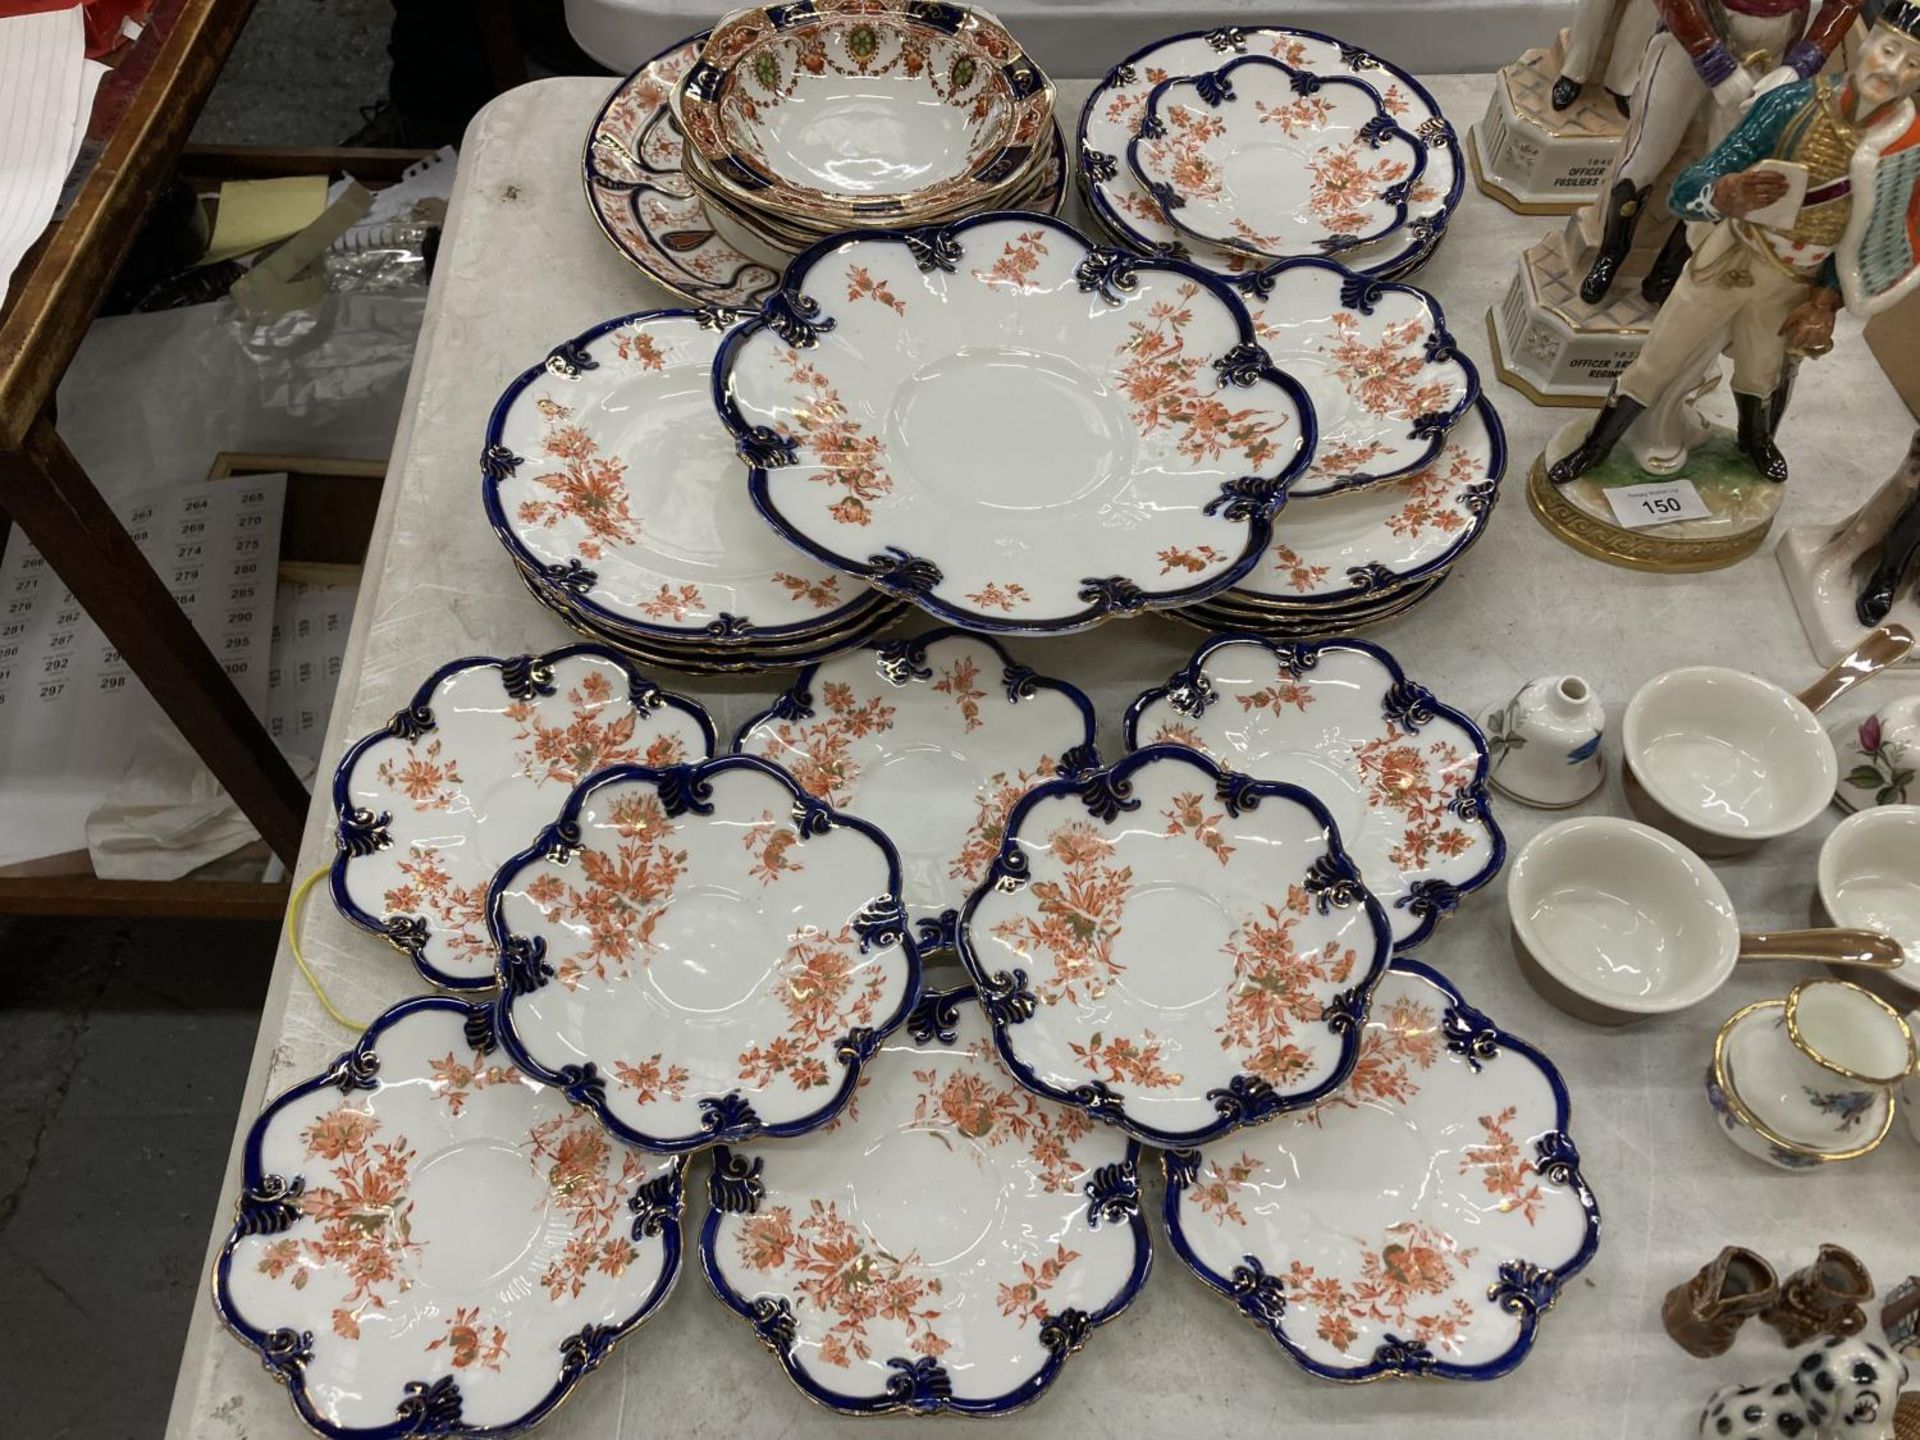 A COLLECTION OF ANTIQUE DAISY SHAPED PLATES PLUS CARLISLE WARE BURGESS BROTHERS BOWLS